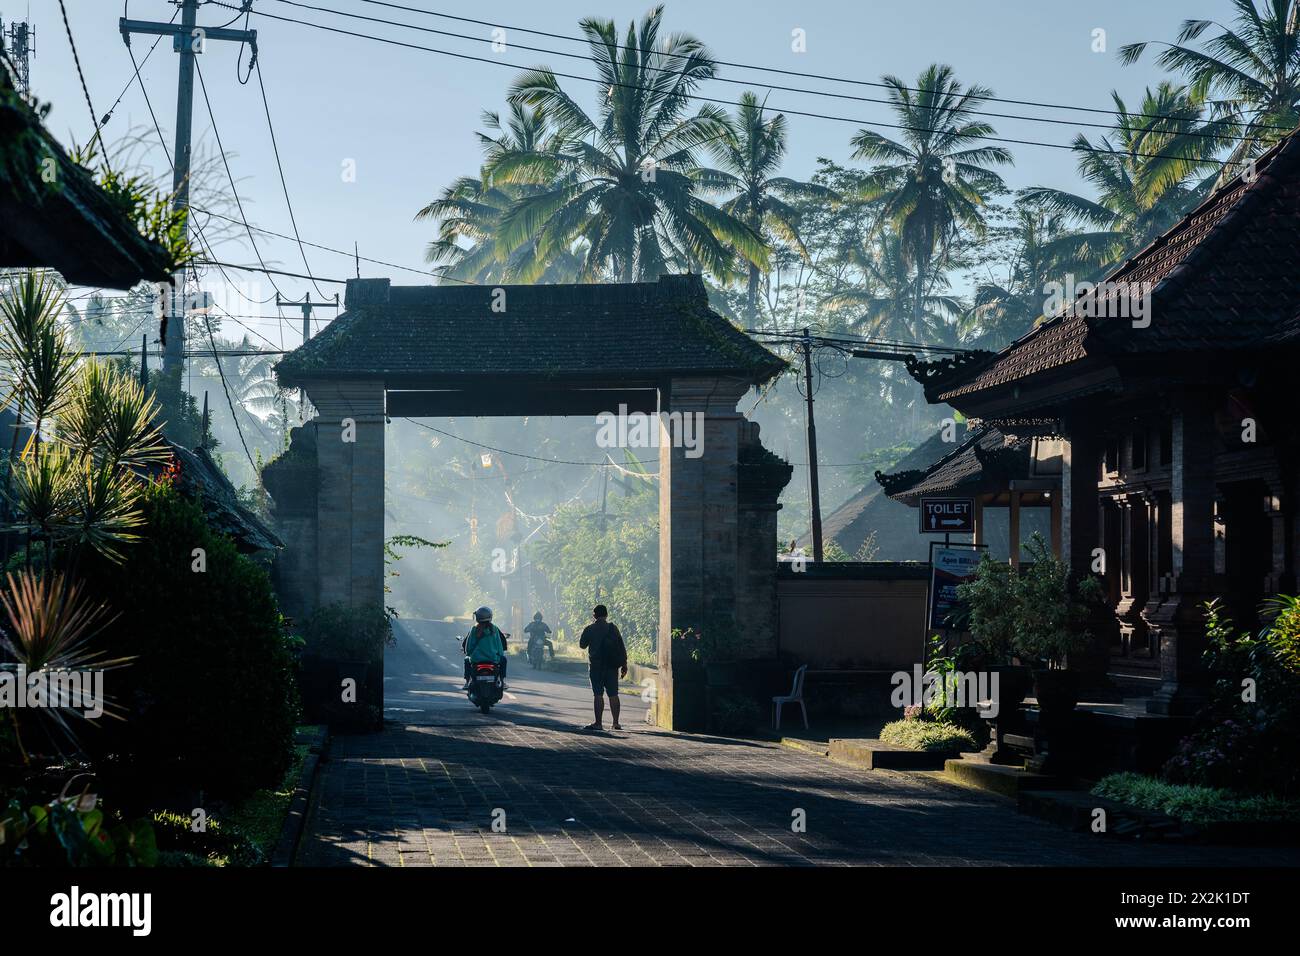 An early morning scene in a tropical village with sunlight filtering through mist, highlighting people and traditional architecture surrounded by lush Stock Photo